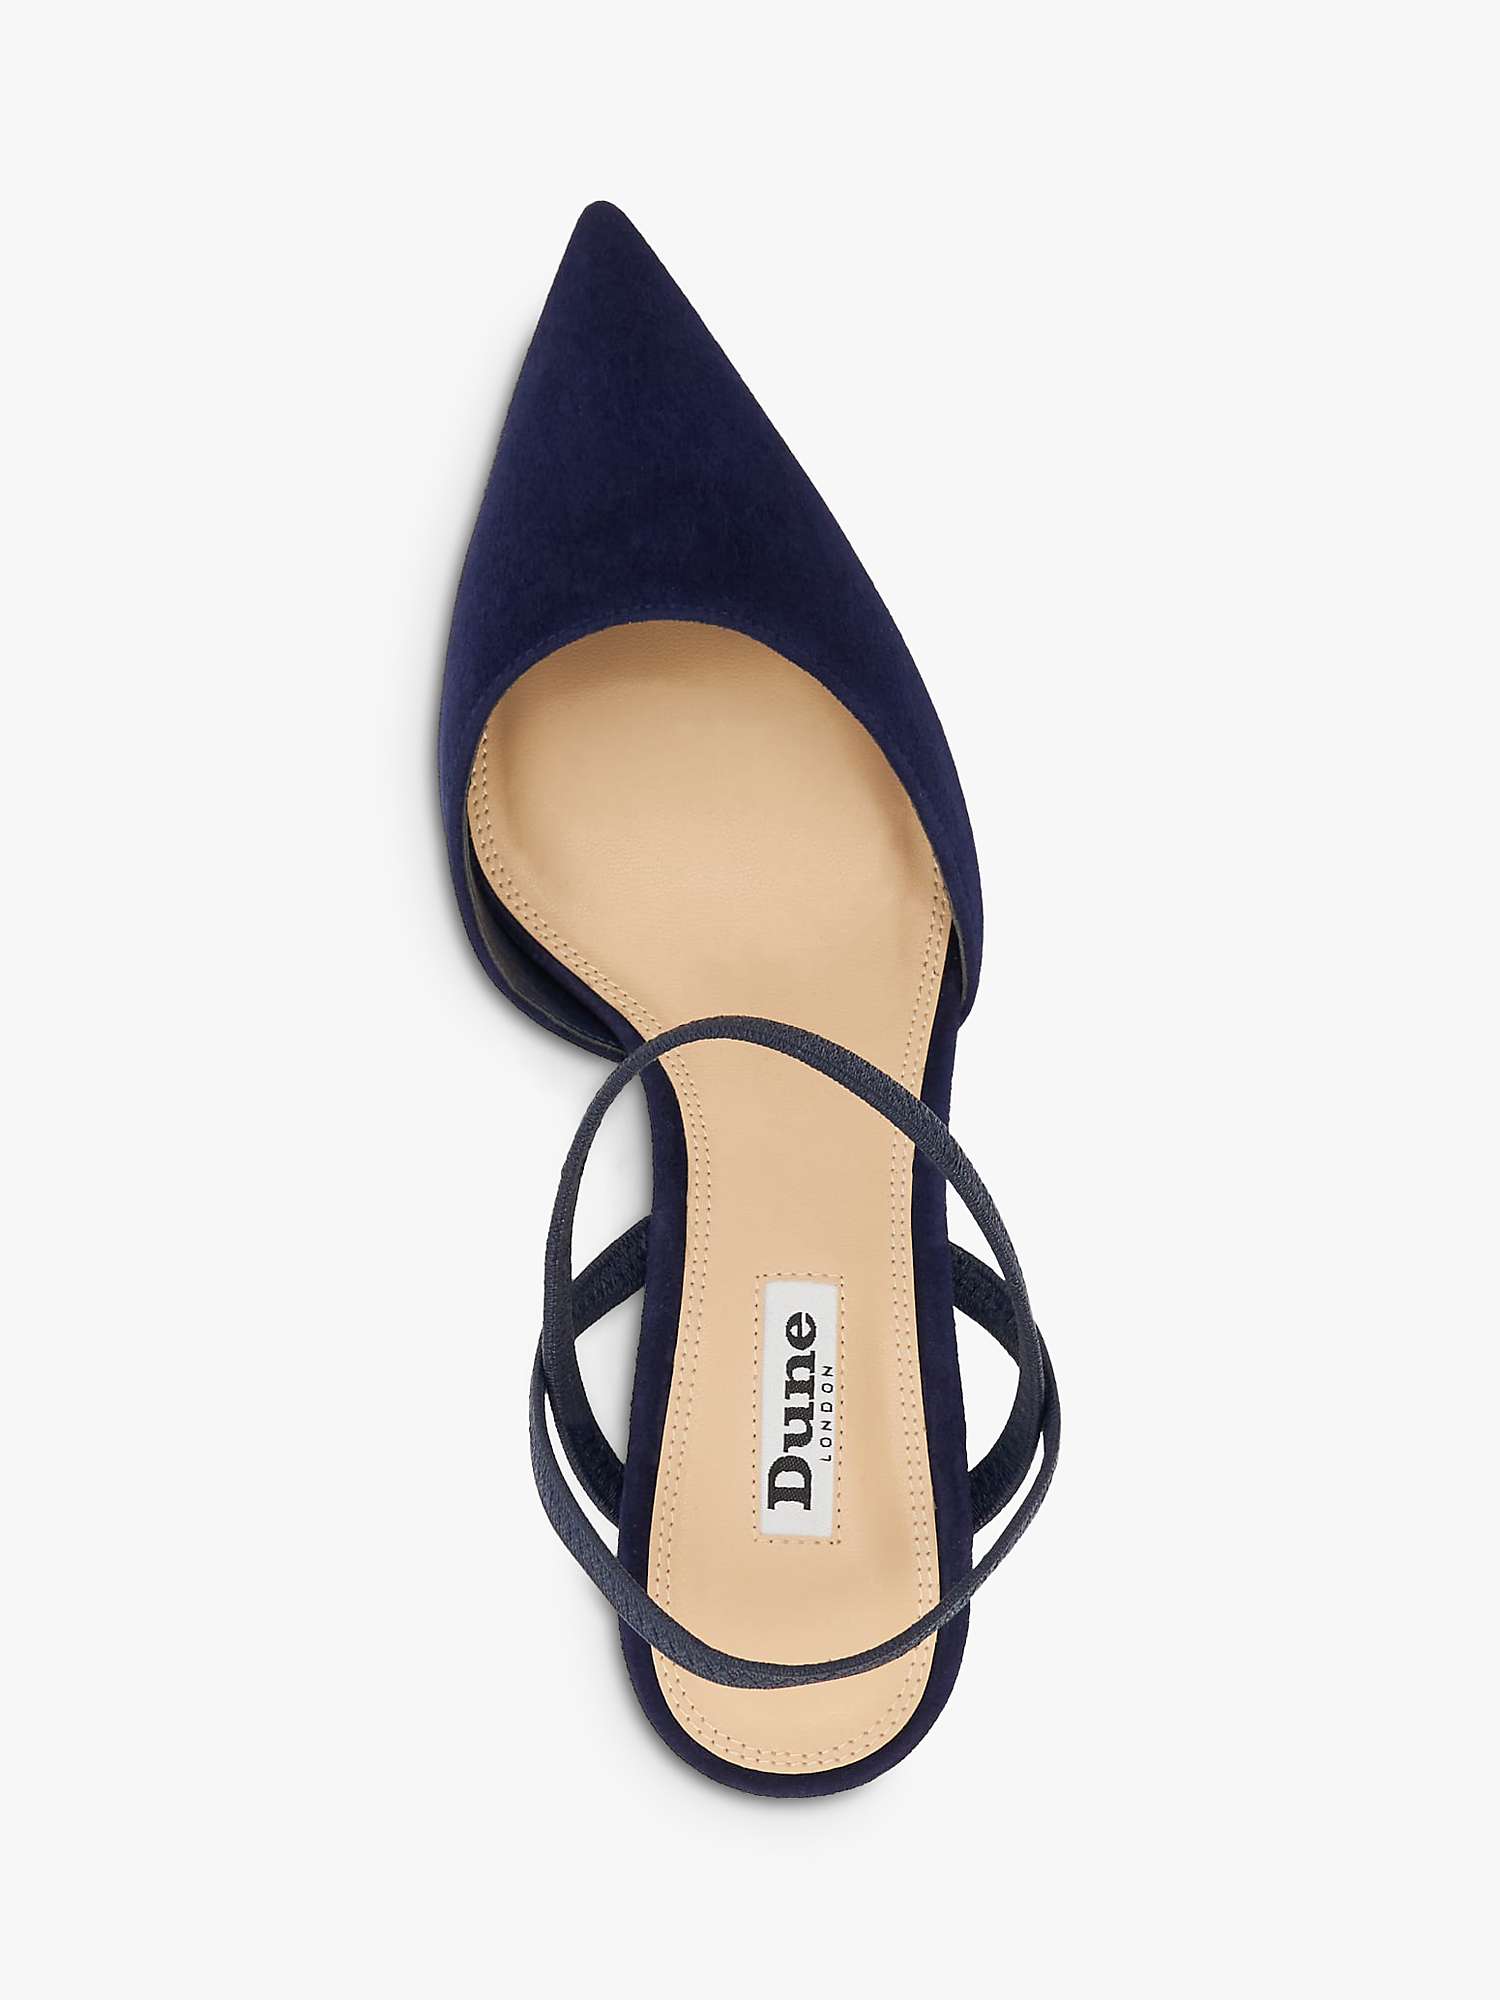 Buy Dune Classical Suede Elasticated Pointed Shoes, Navy Online at johnlewis.com